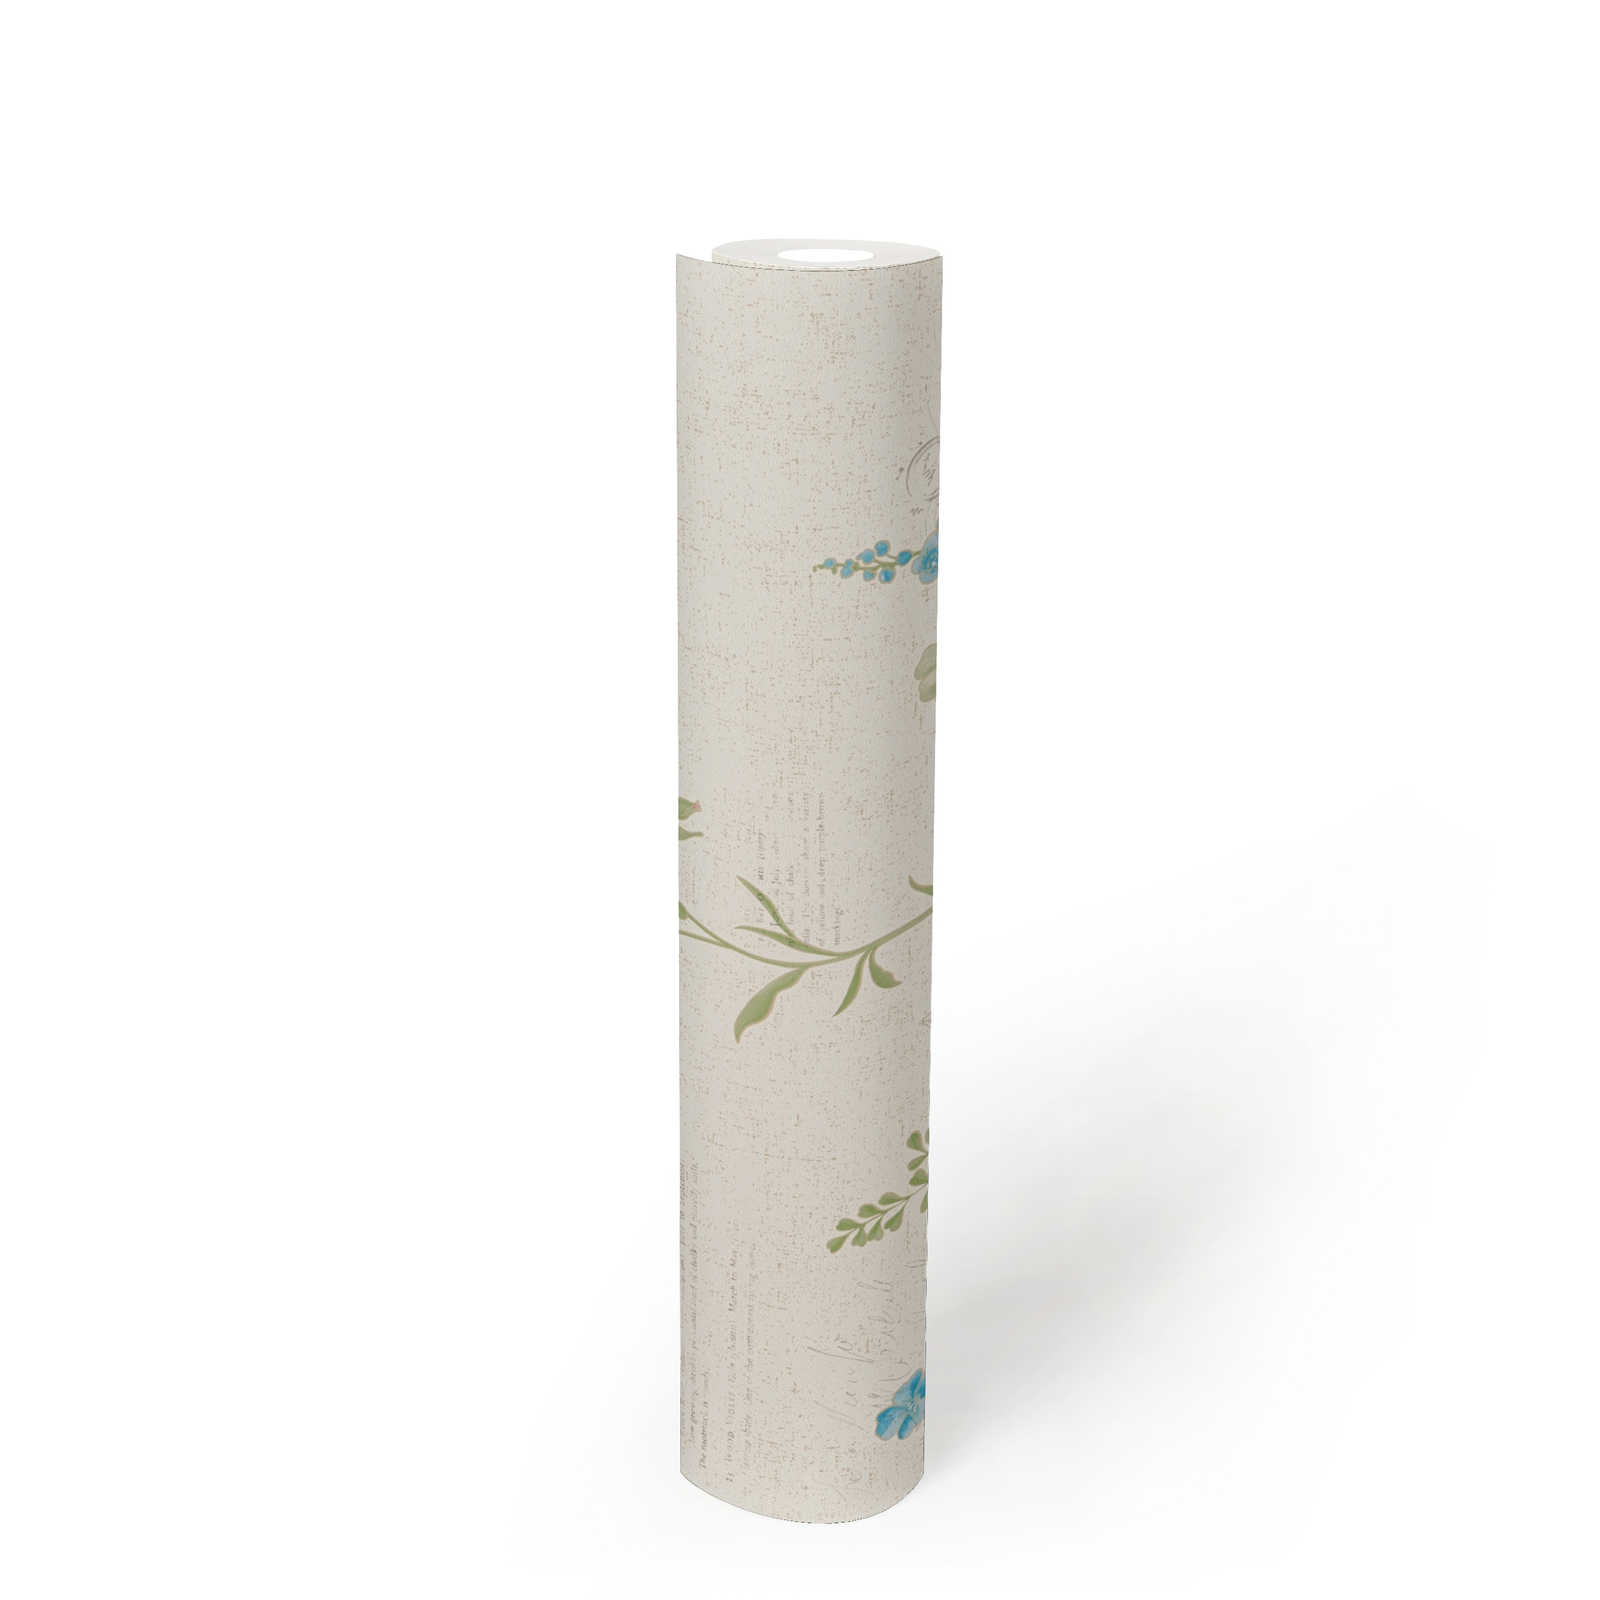             Country house wallpaper with floral pattern and used look - cream
        